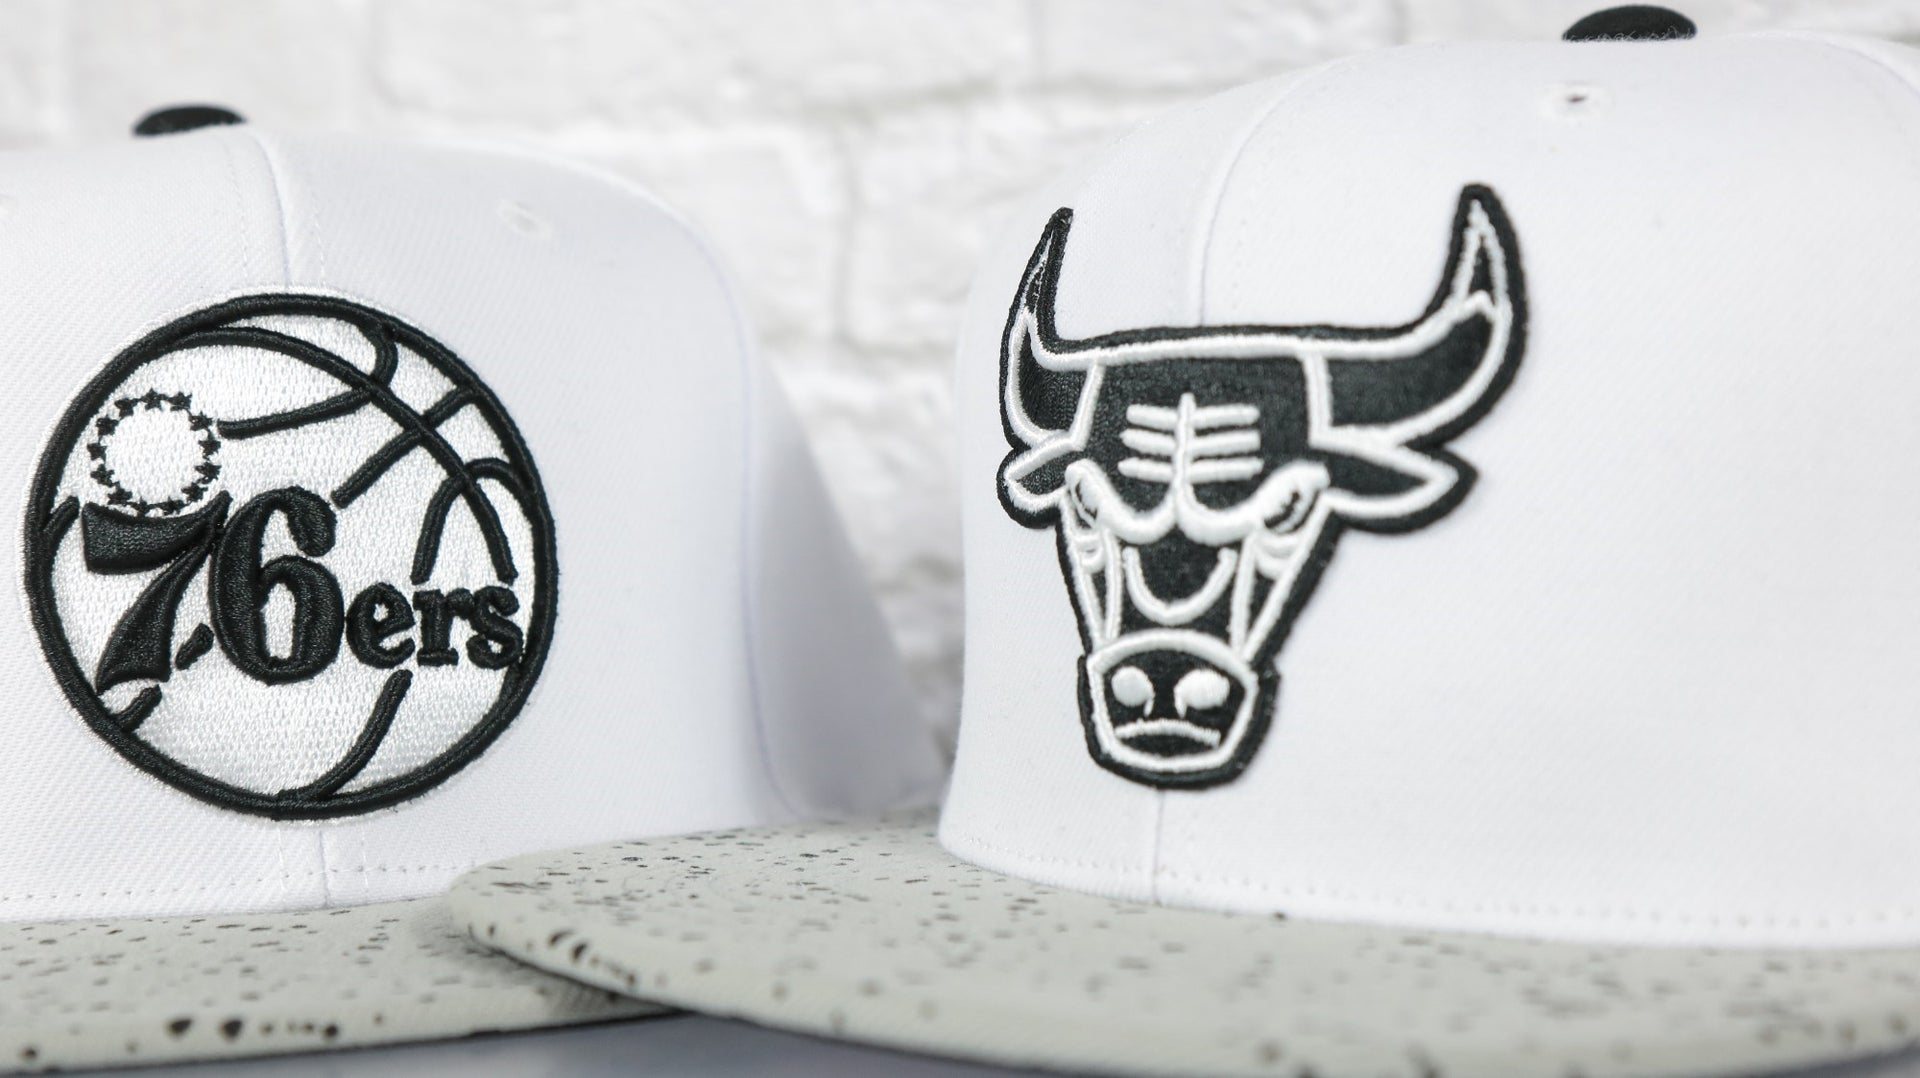 Mitchell and Ness "Cement Top" Snapback Hats